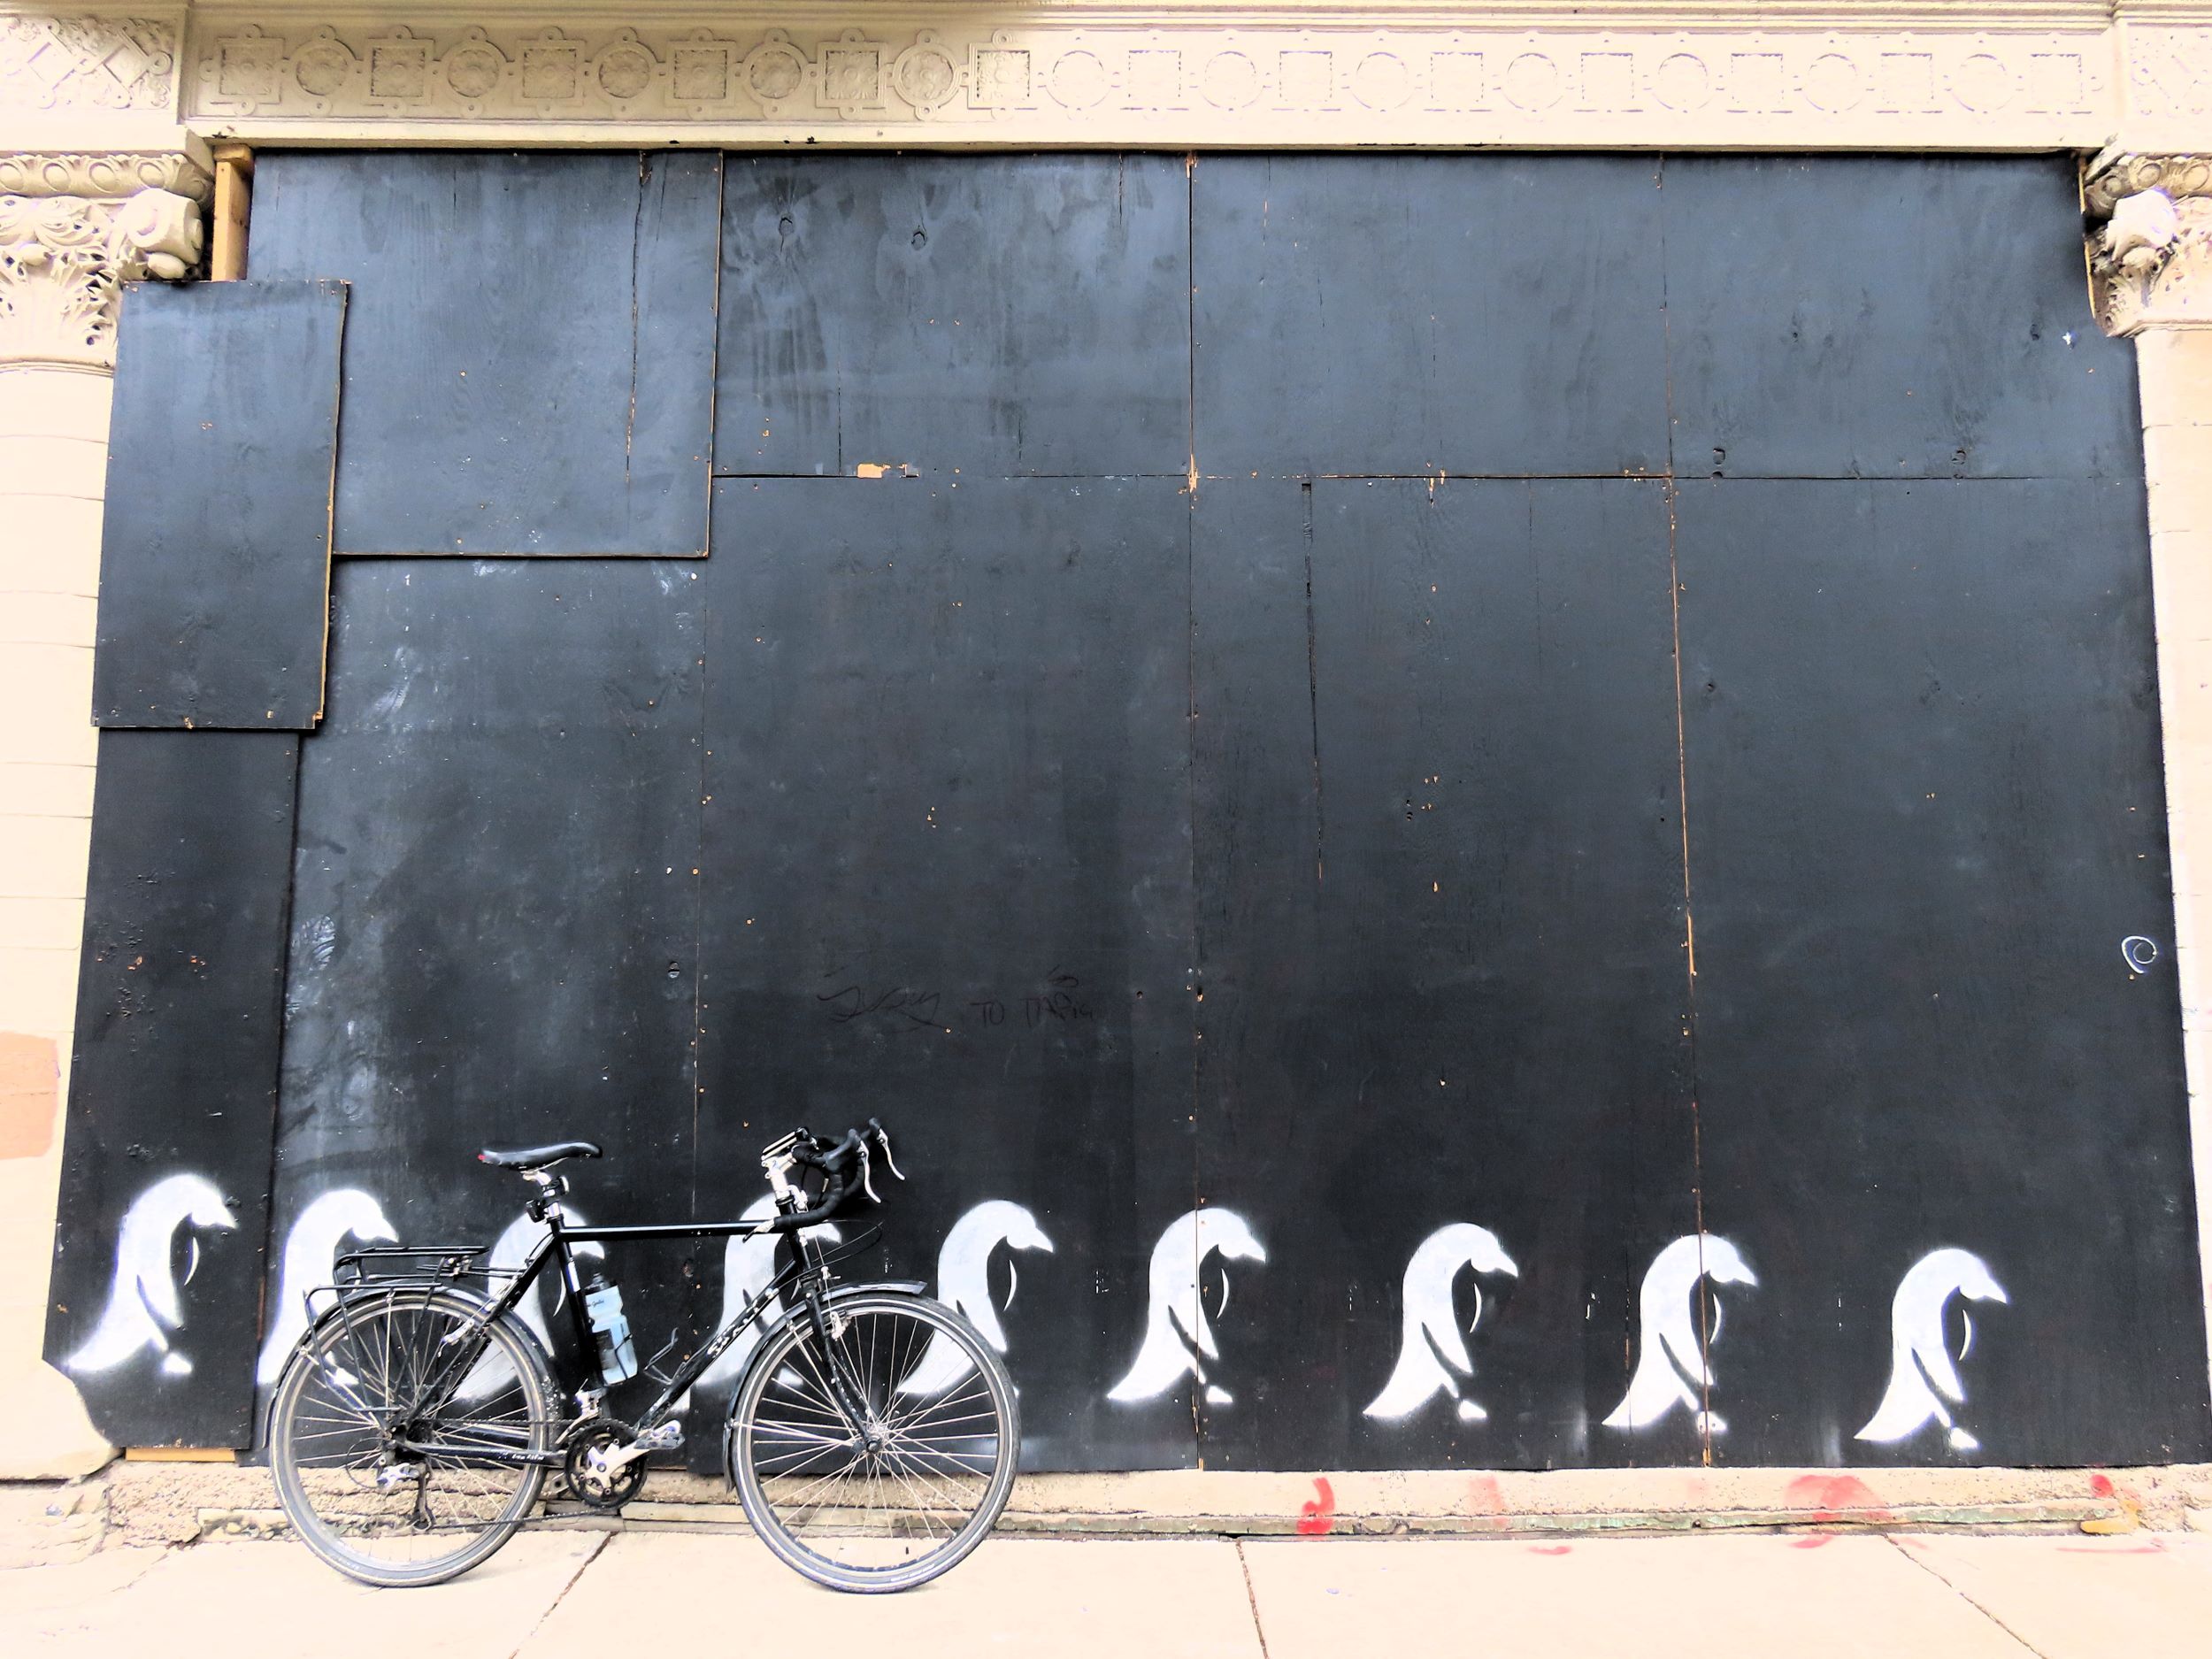 A tour bicycle leaning at right on a black painted board with a single row of white stenciled penguins along the bottom